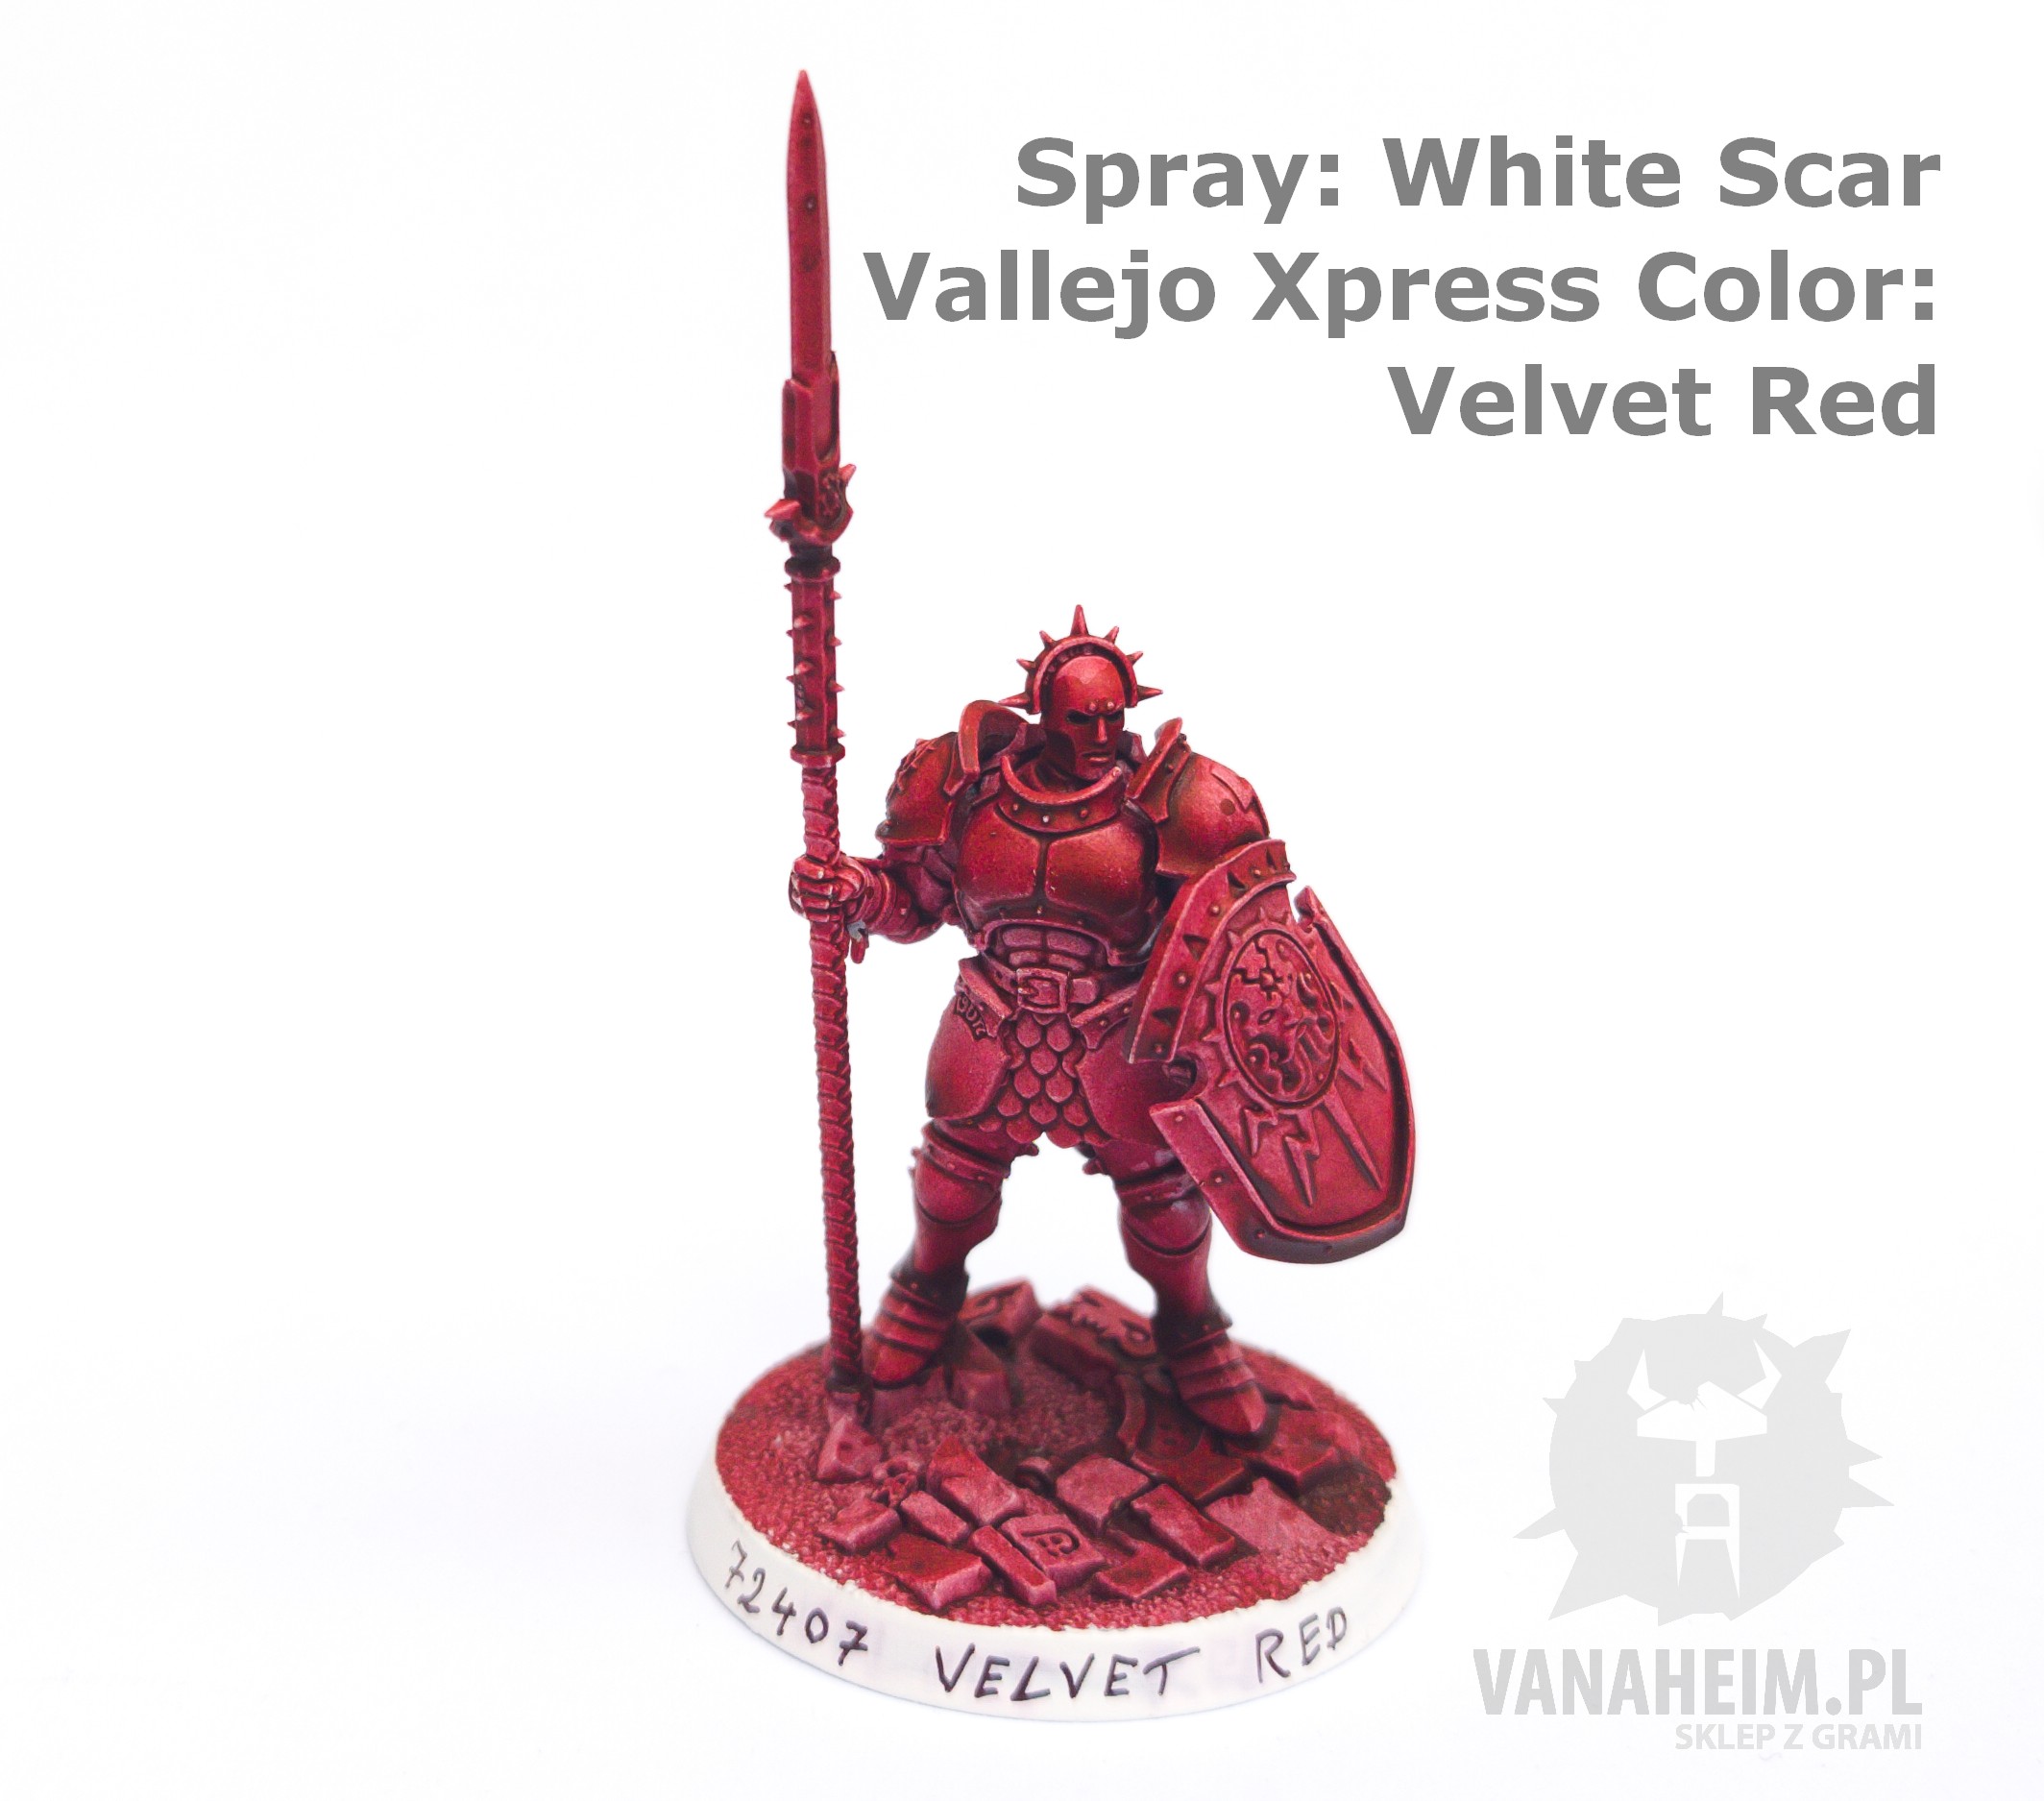 Vallejo Xpress Color Paint On White Spray Reference